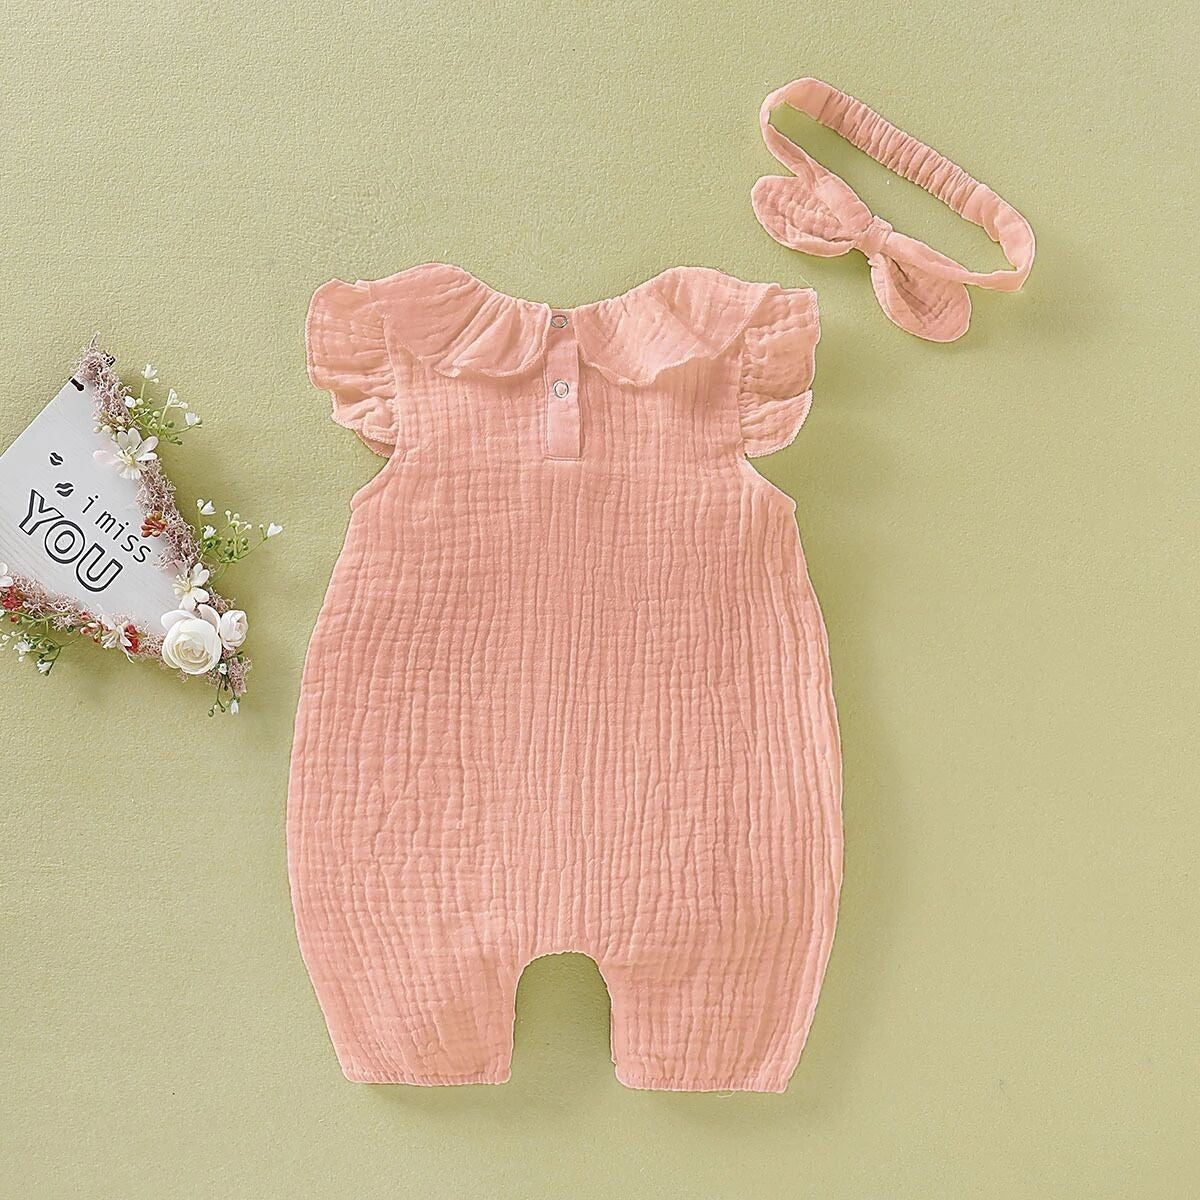 Hot Sale Novelty Baby Girls Clothes Ribbed Jumpsuit For Children Turtleneck  Bodysuit Sleeveless Romper Youth Kids Onesies 1-7y - Children's Sets -  AliExpress